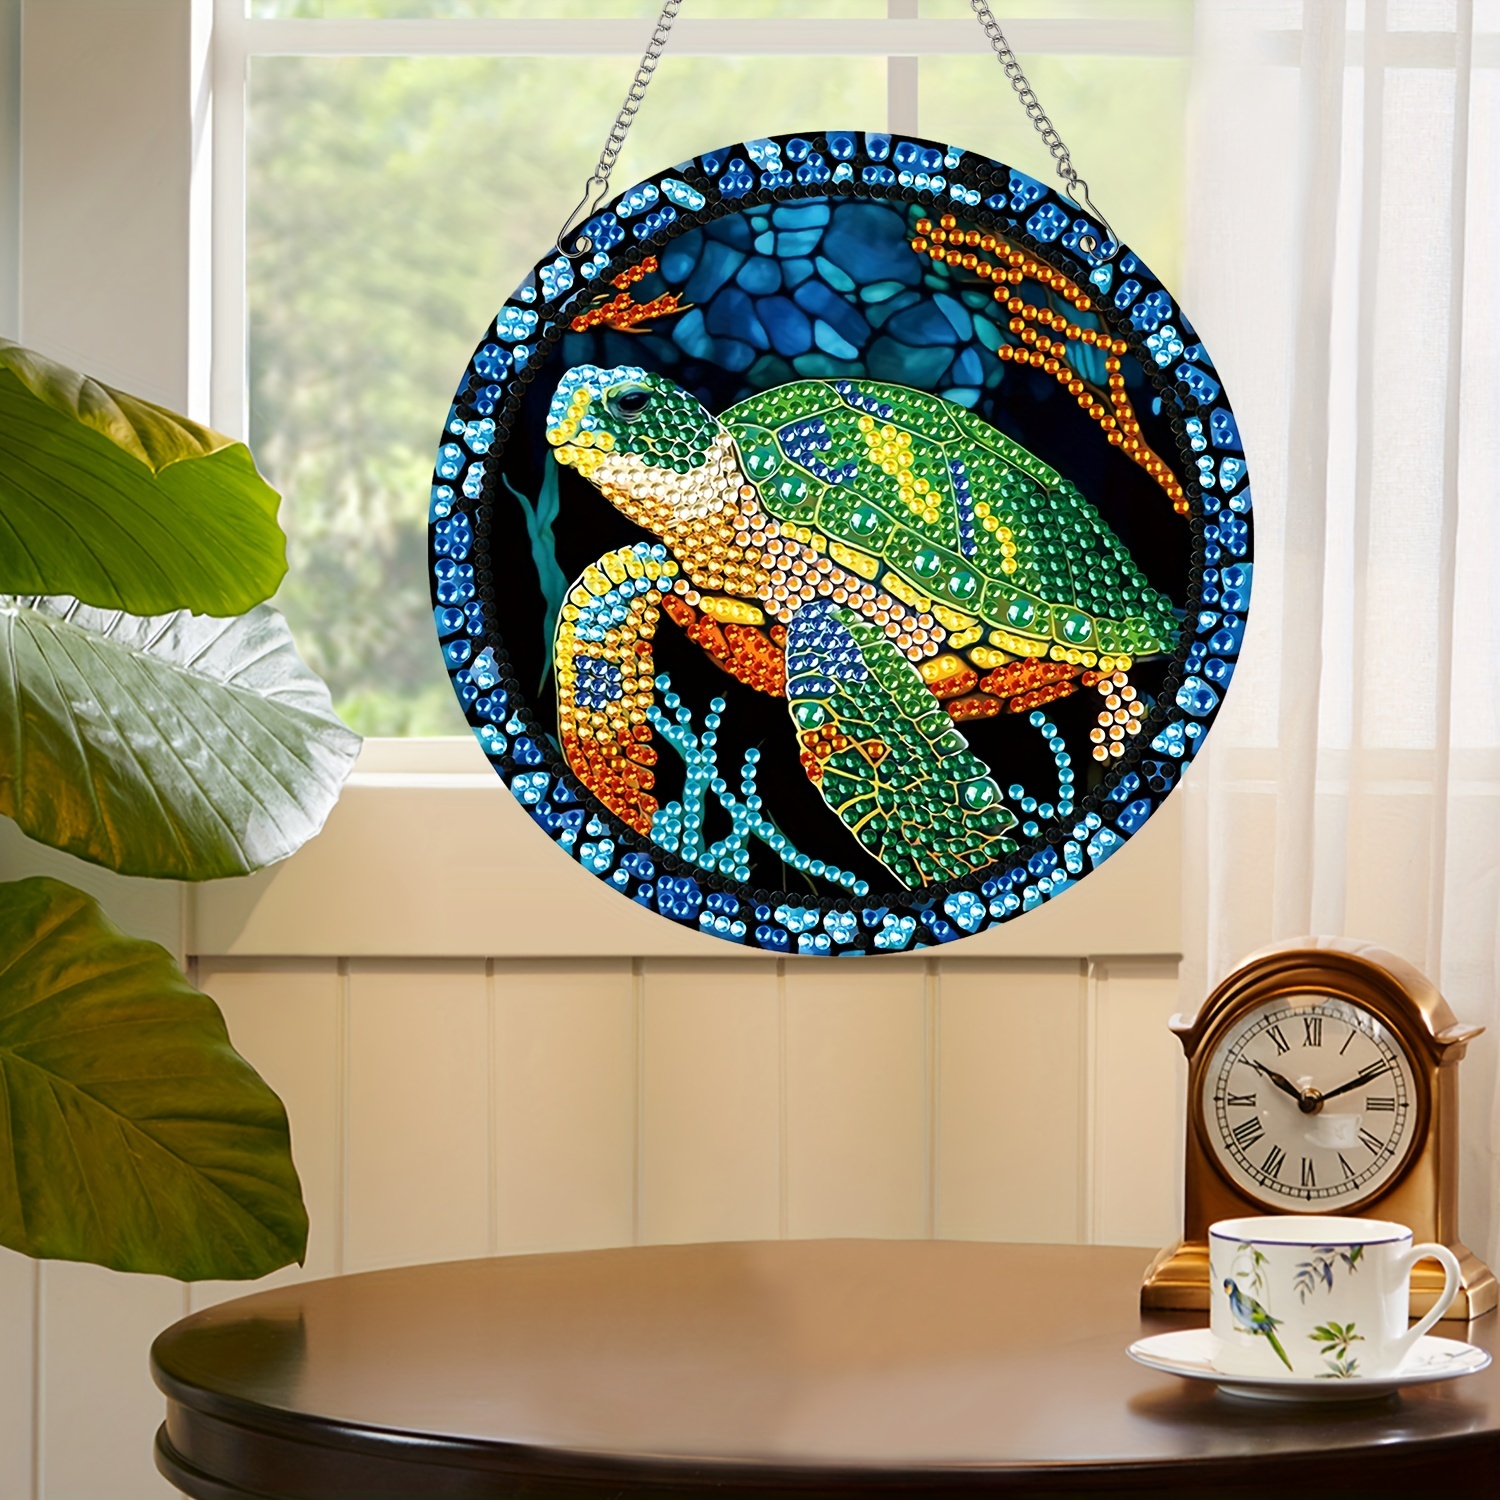 5D Diamond Painting Kits Sea Turtle Stained Glass DIY Diamond Full Round  Drill Diamond Art Painting for Adults with Accessories for Home Wall Decor